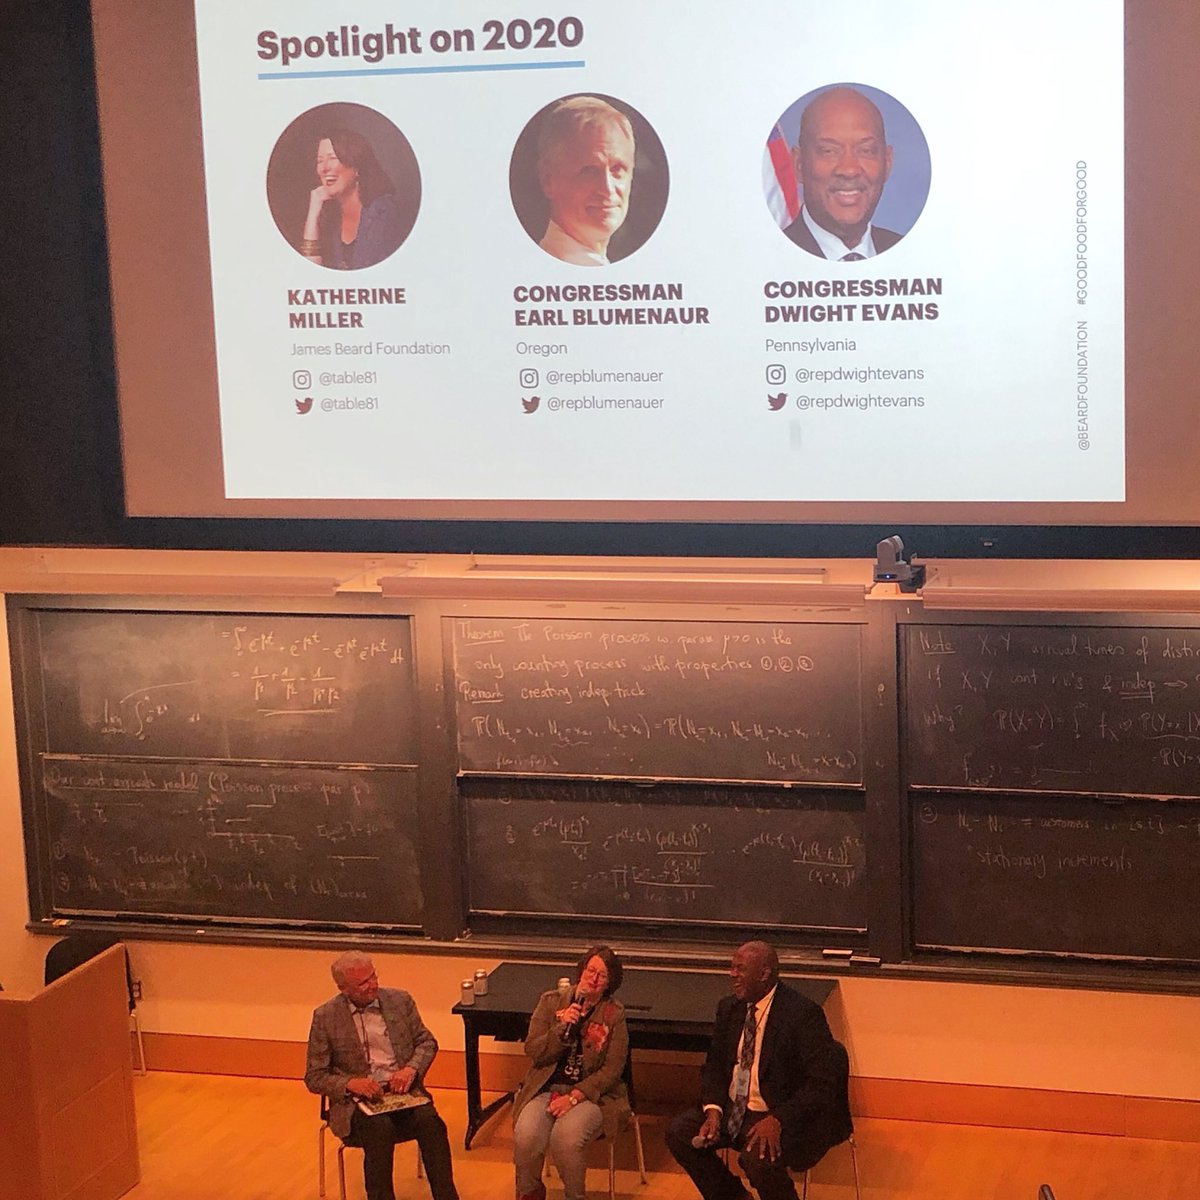 Spotlight On 2020. Discussion on food policy in the upcoming election with @table81 @repblumenauer @repdwightevans during today’s @beardfoundation Chef Action Summit. #goodfoodforgood #chefslead #jbfimpact